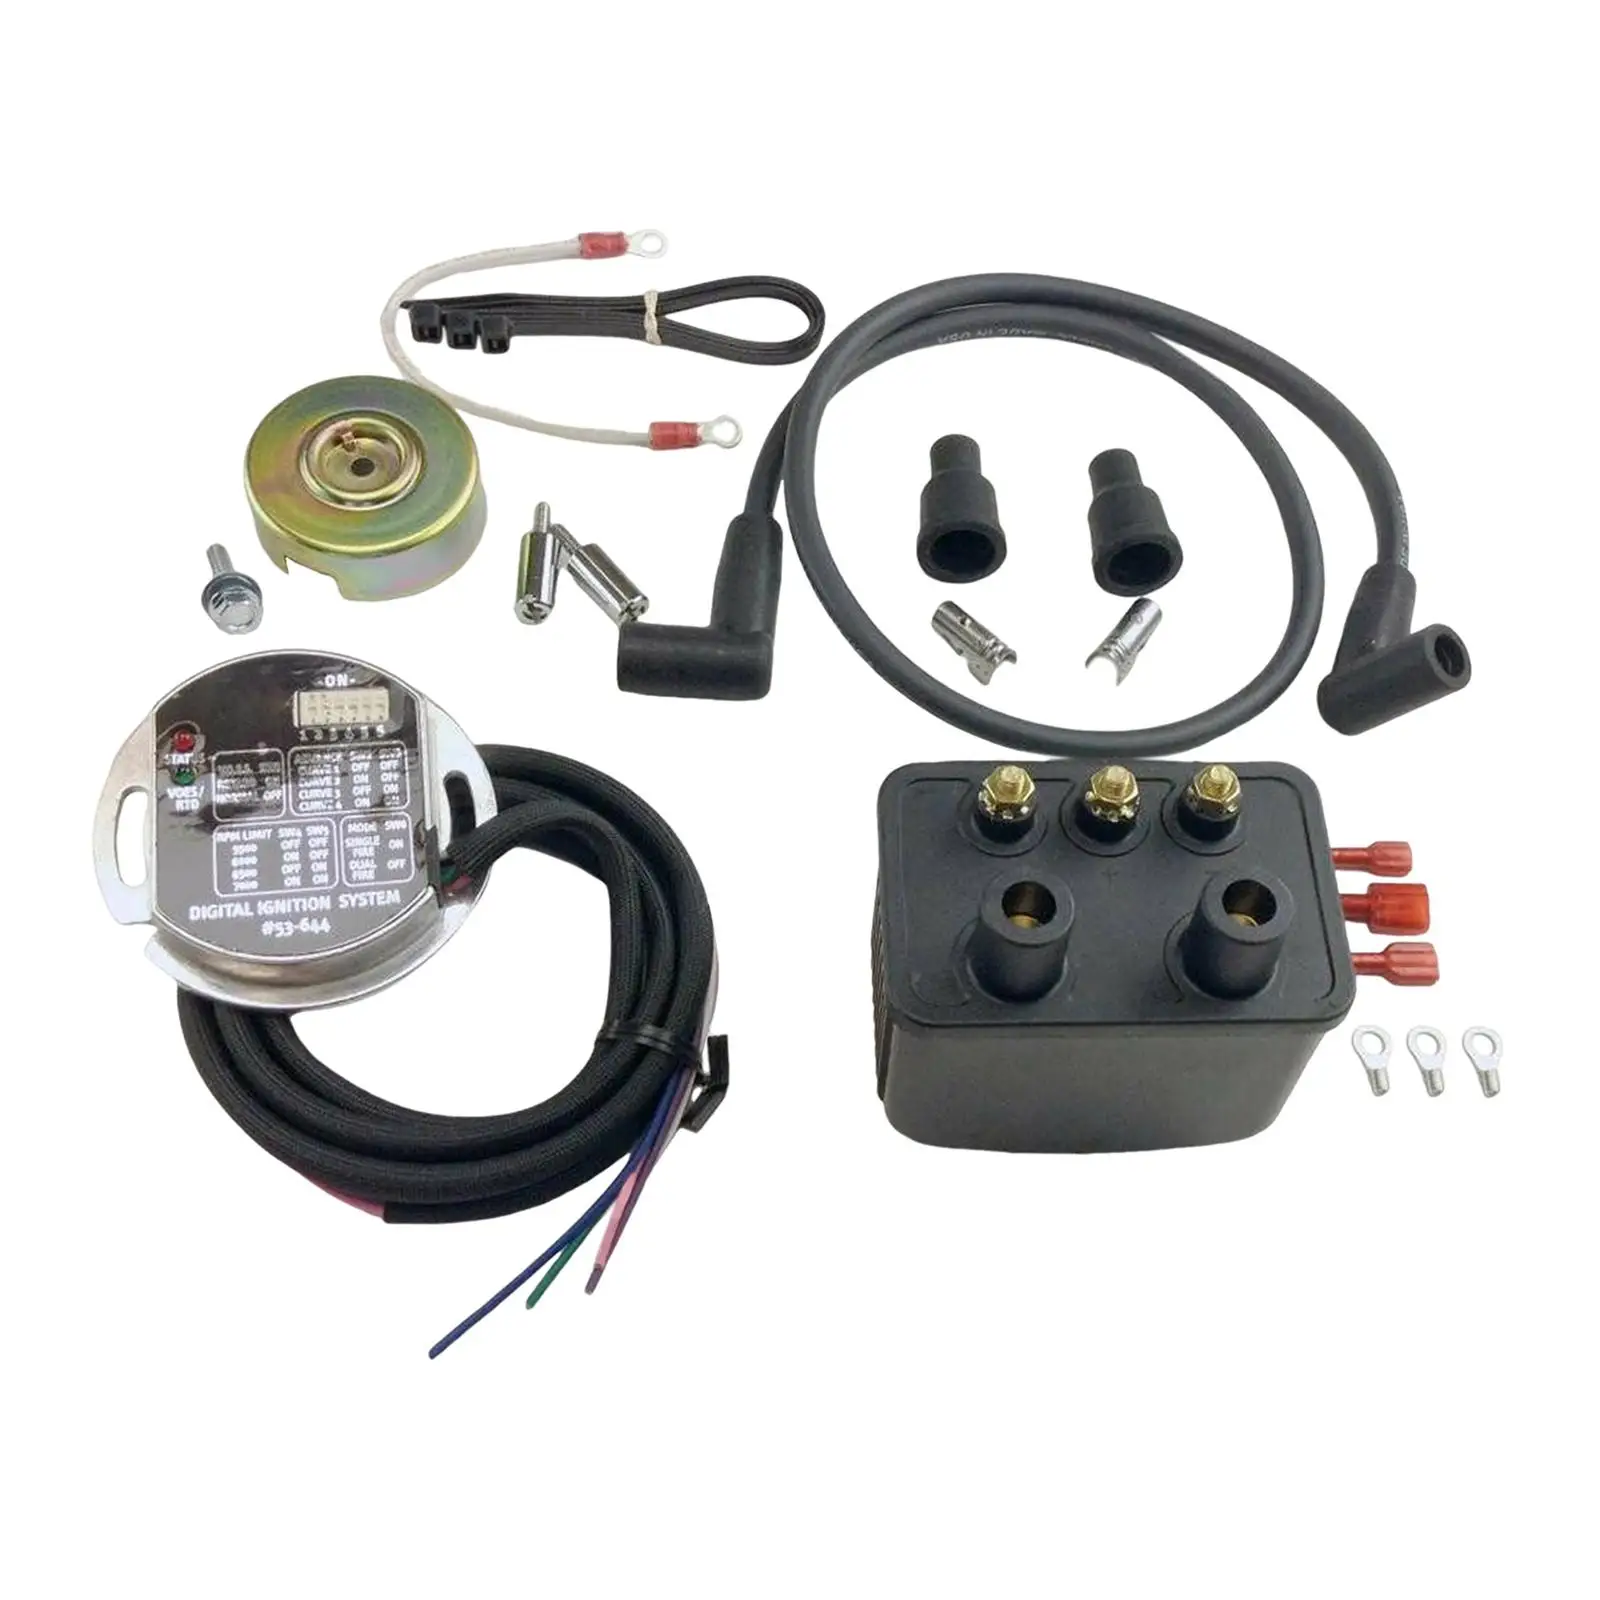 Single Fire Programmable Ignition Kit Replaces Accessories for Harley Shovelhead Evolution Professional Repair Part Premium